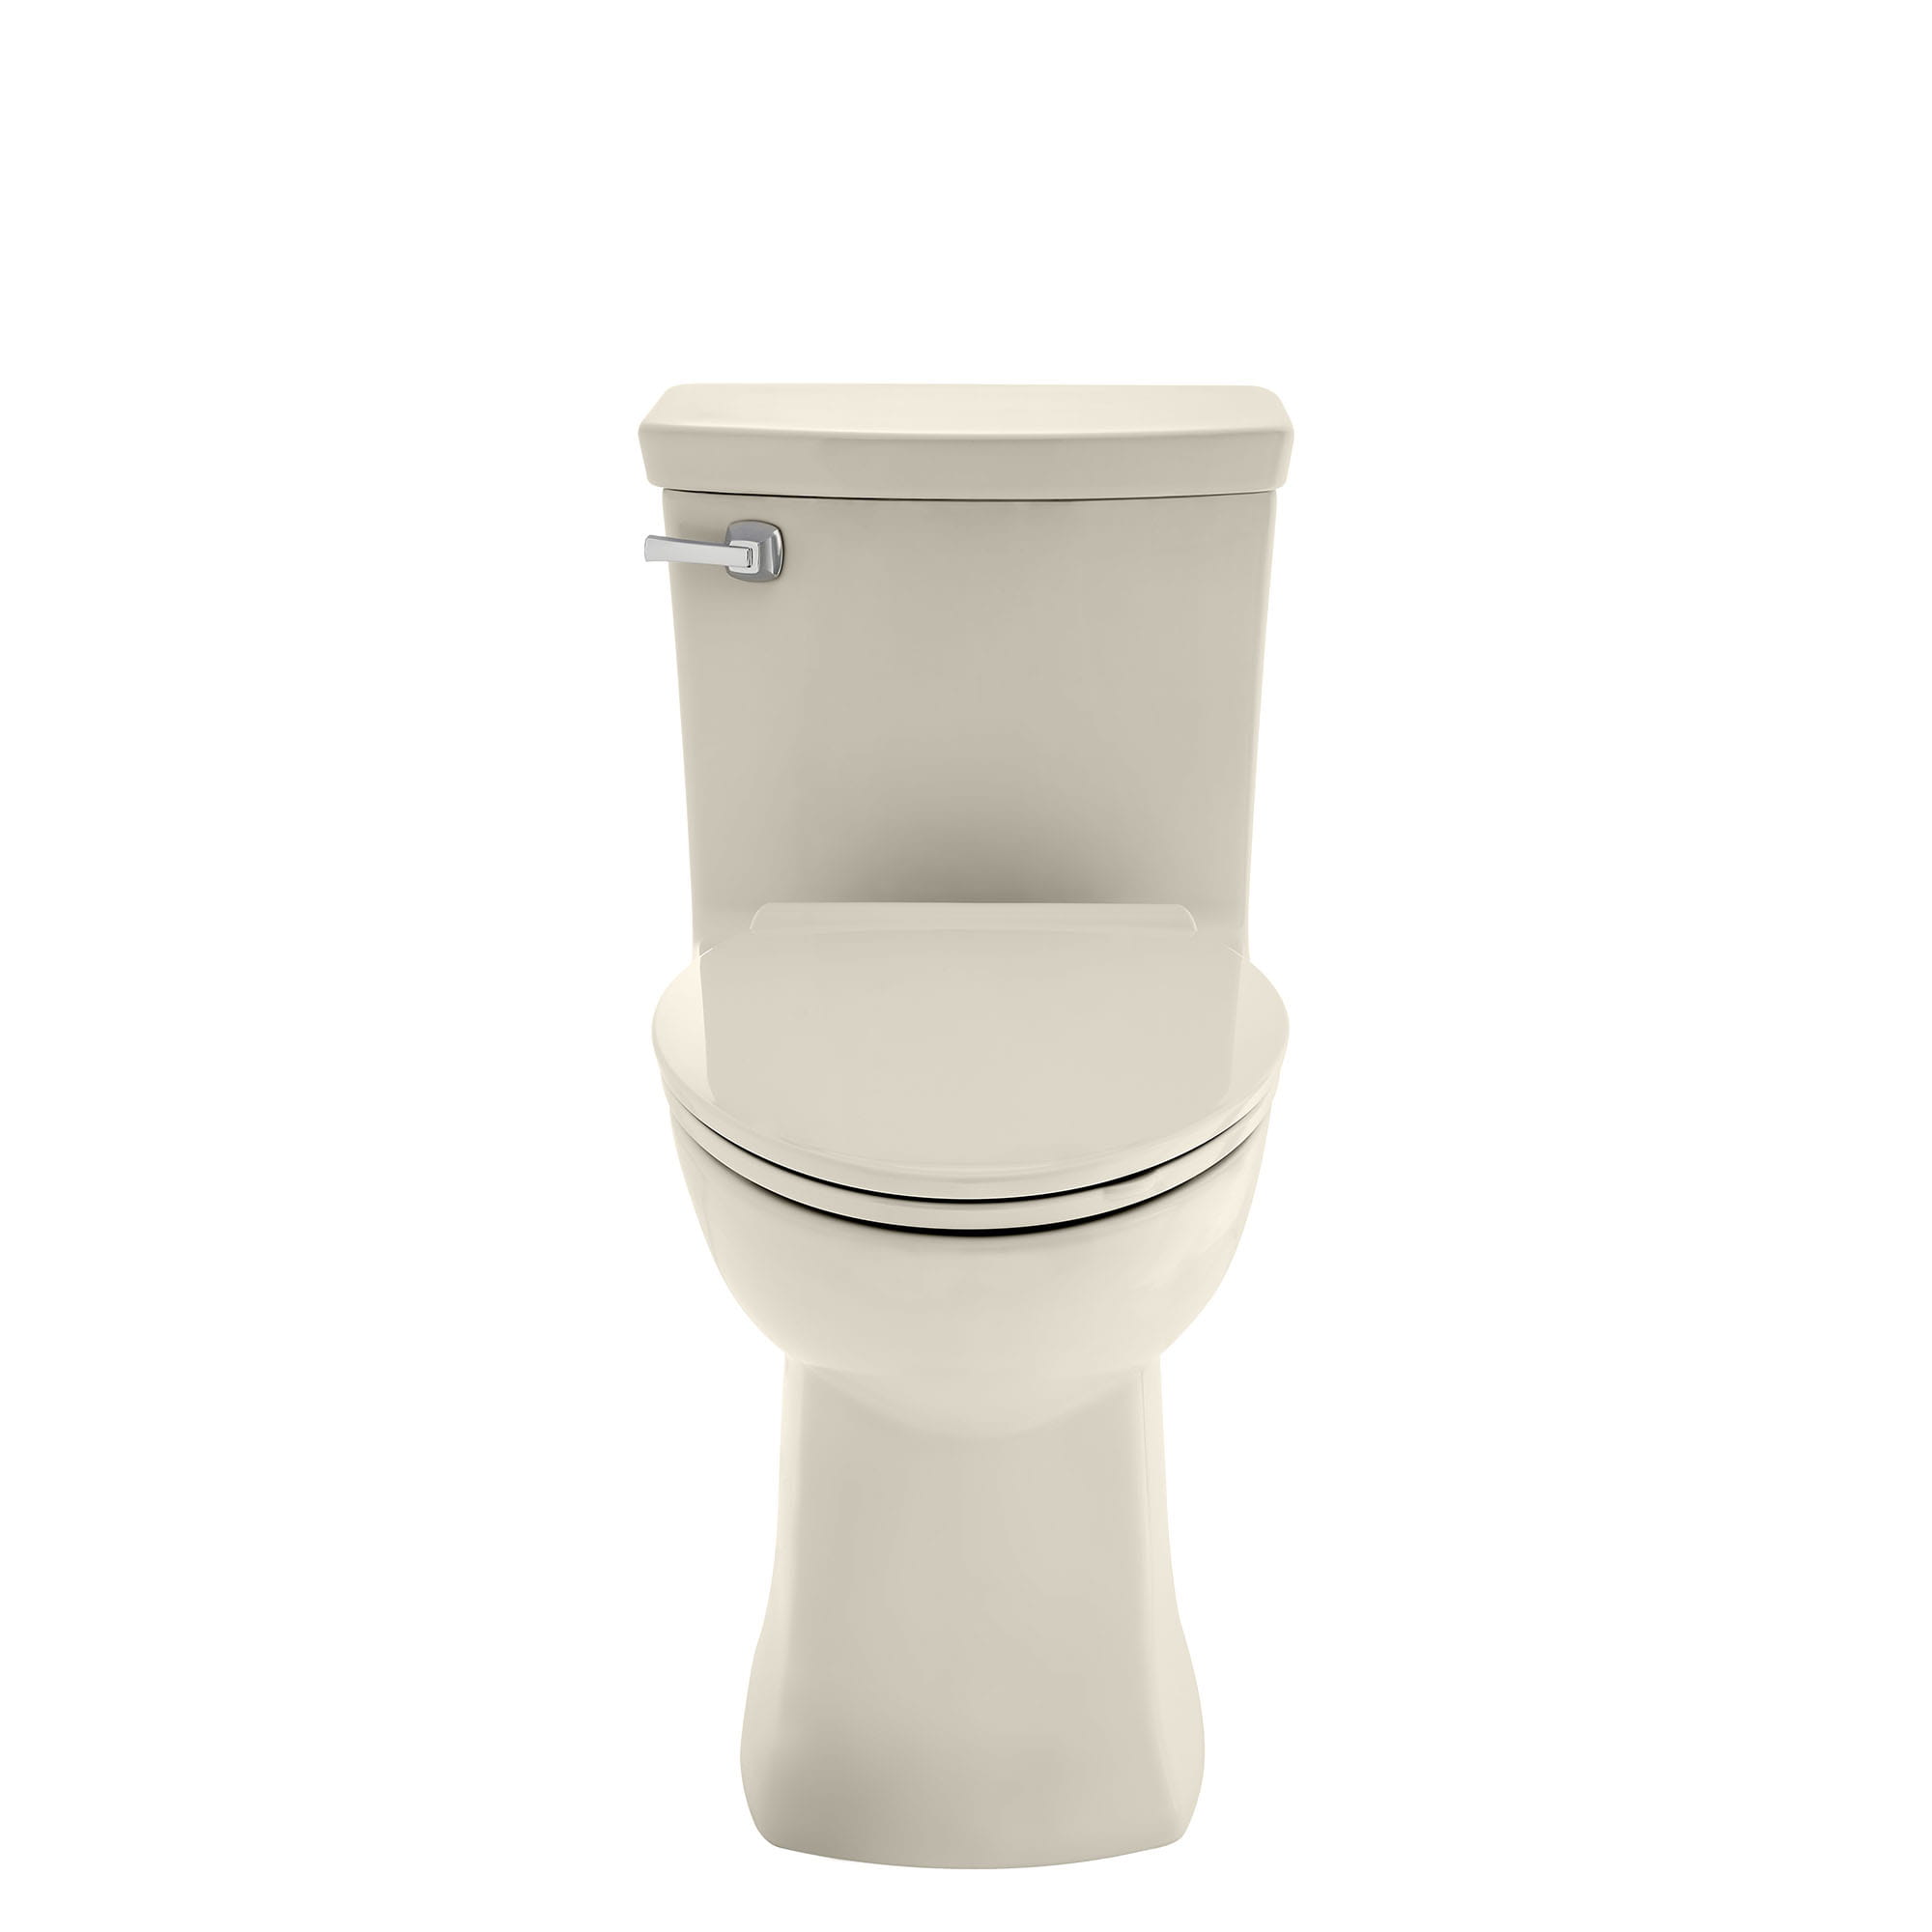 Townsend VorMax One Piece 128 gpf 48 Lpf Chair Height Elongated Toilet with Seat LINEN